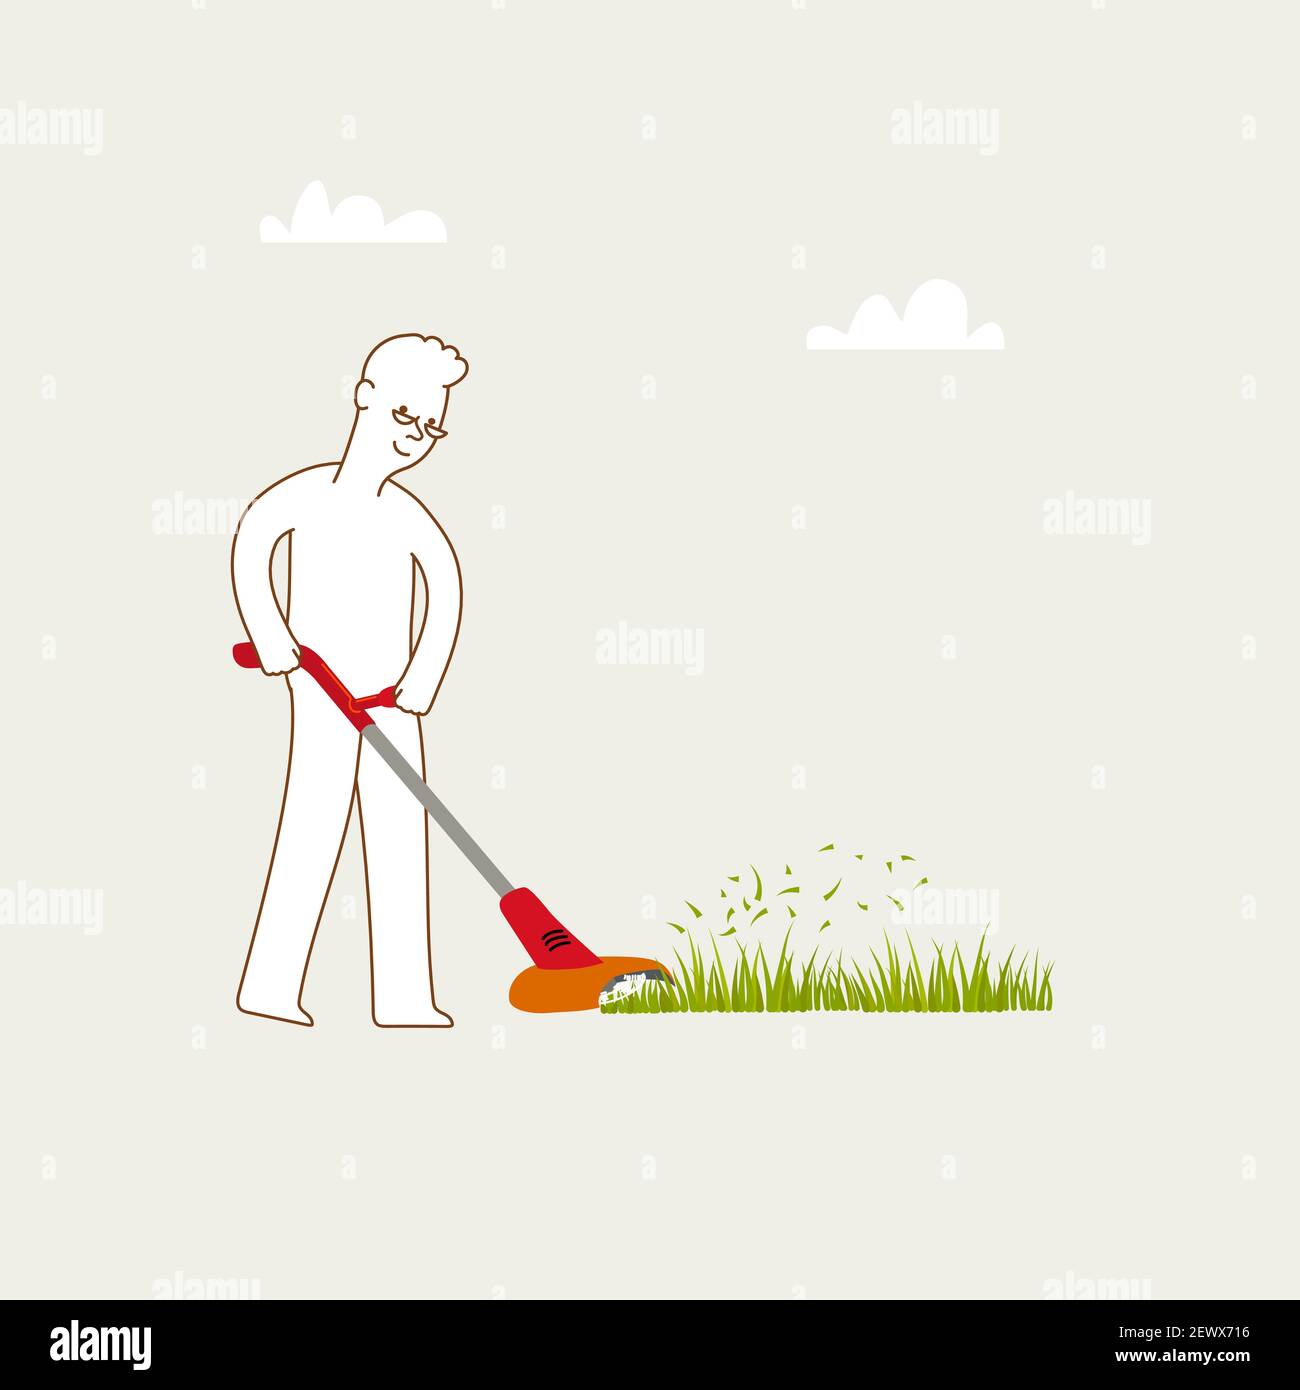 Man cutting grass with handheld grass cutter. concept illustration for hobby, retirement. Minimal design. Stock Vector